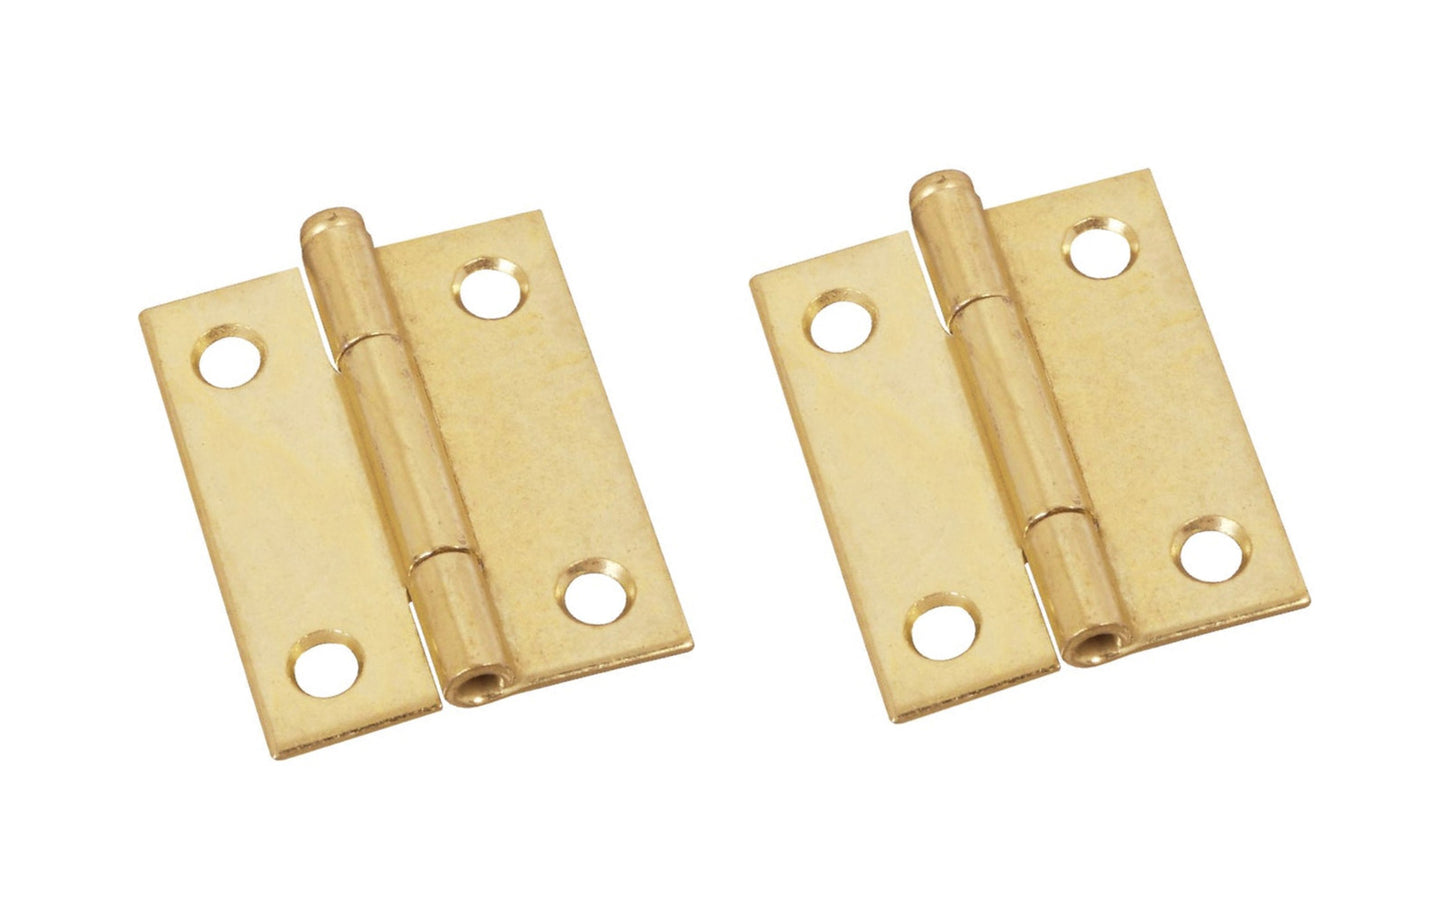 2" Brass-Plated Loose-Pin Narrow Hinges - 2 Pack. 2" high x 1-9/16" wide. Made of cold-rolled steel with brass plating. Surface mount. Removable pin hinges. Sold as a pair of hinges. National Hardware Model No. N141-879. 038613141872